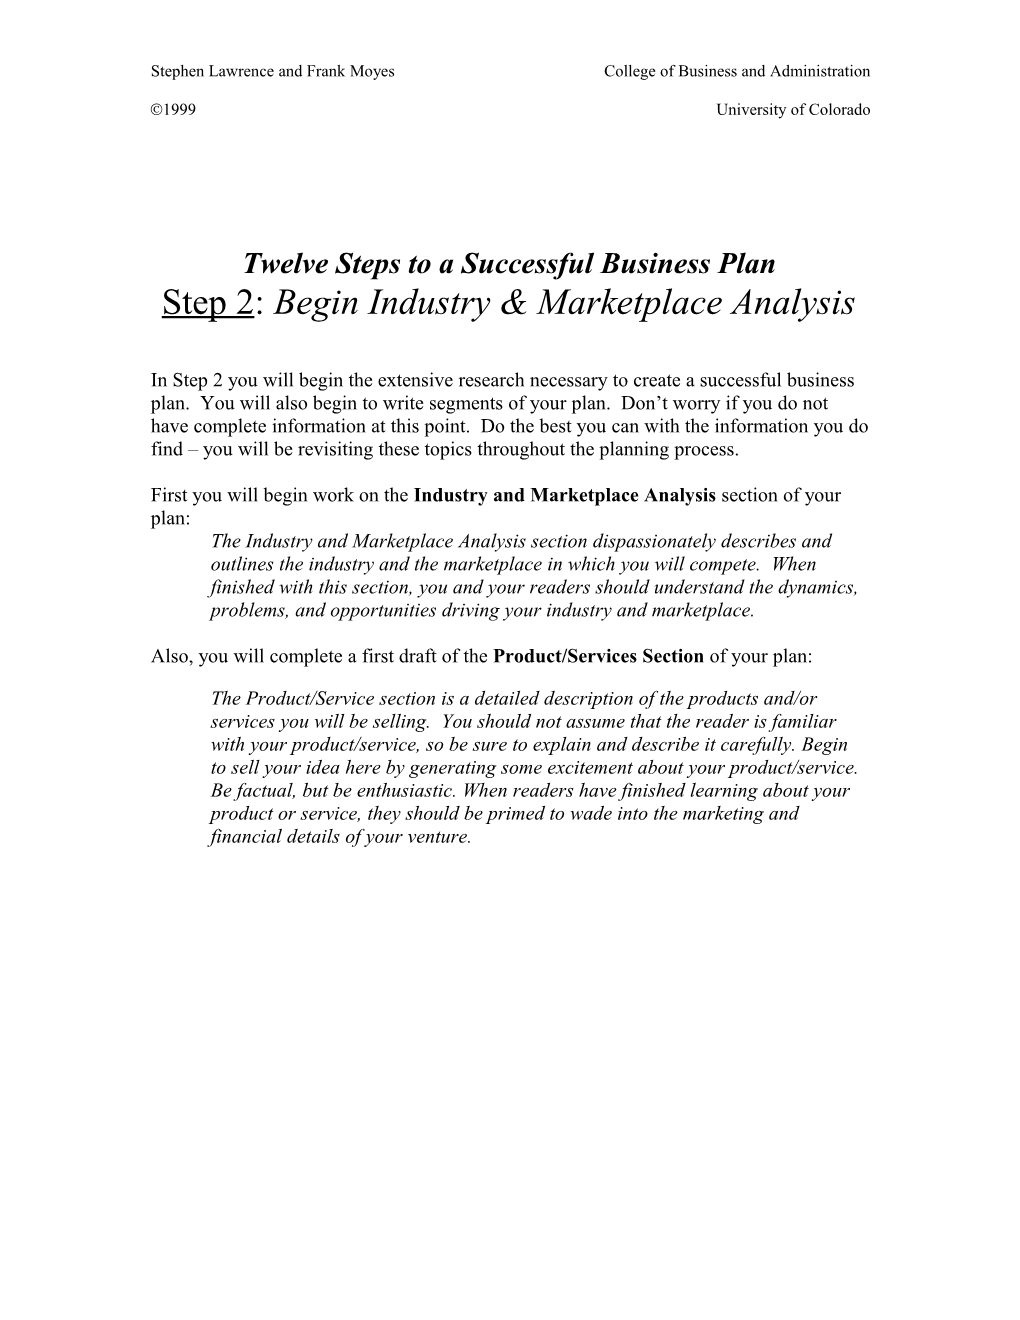 Twelve Steps to a Successful Business Plan